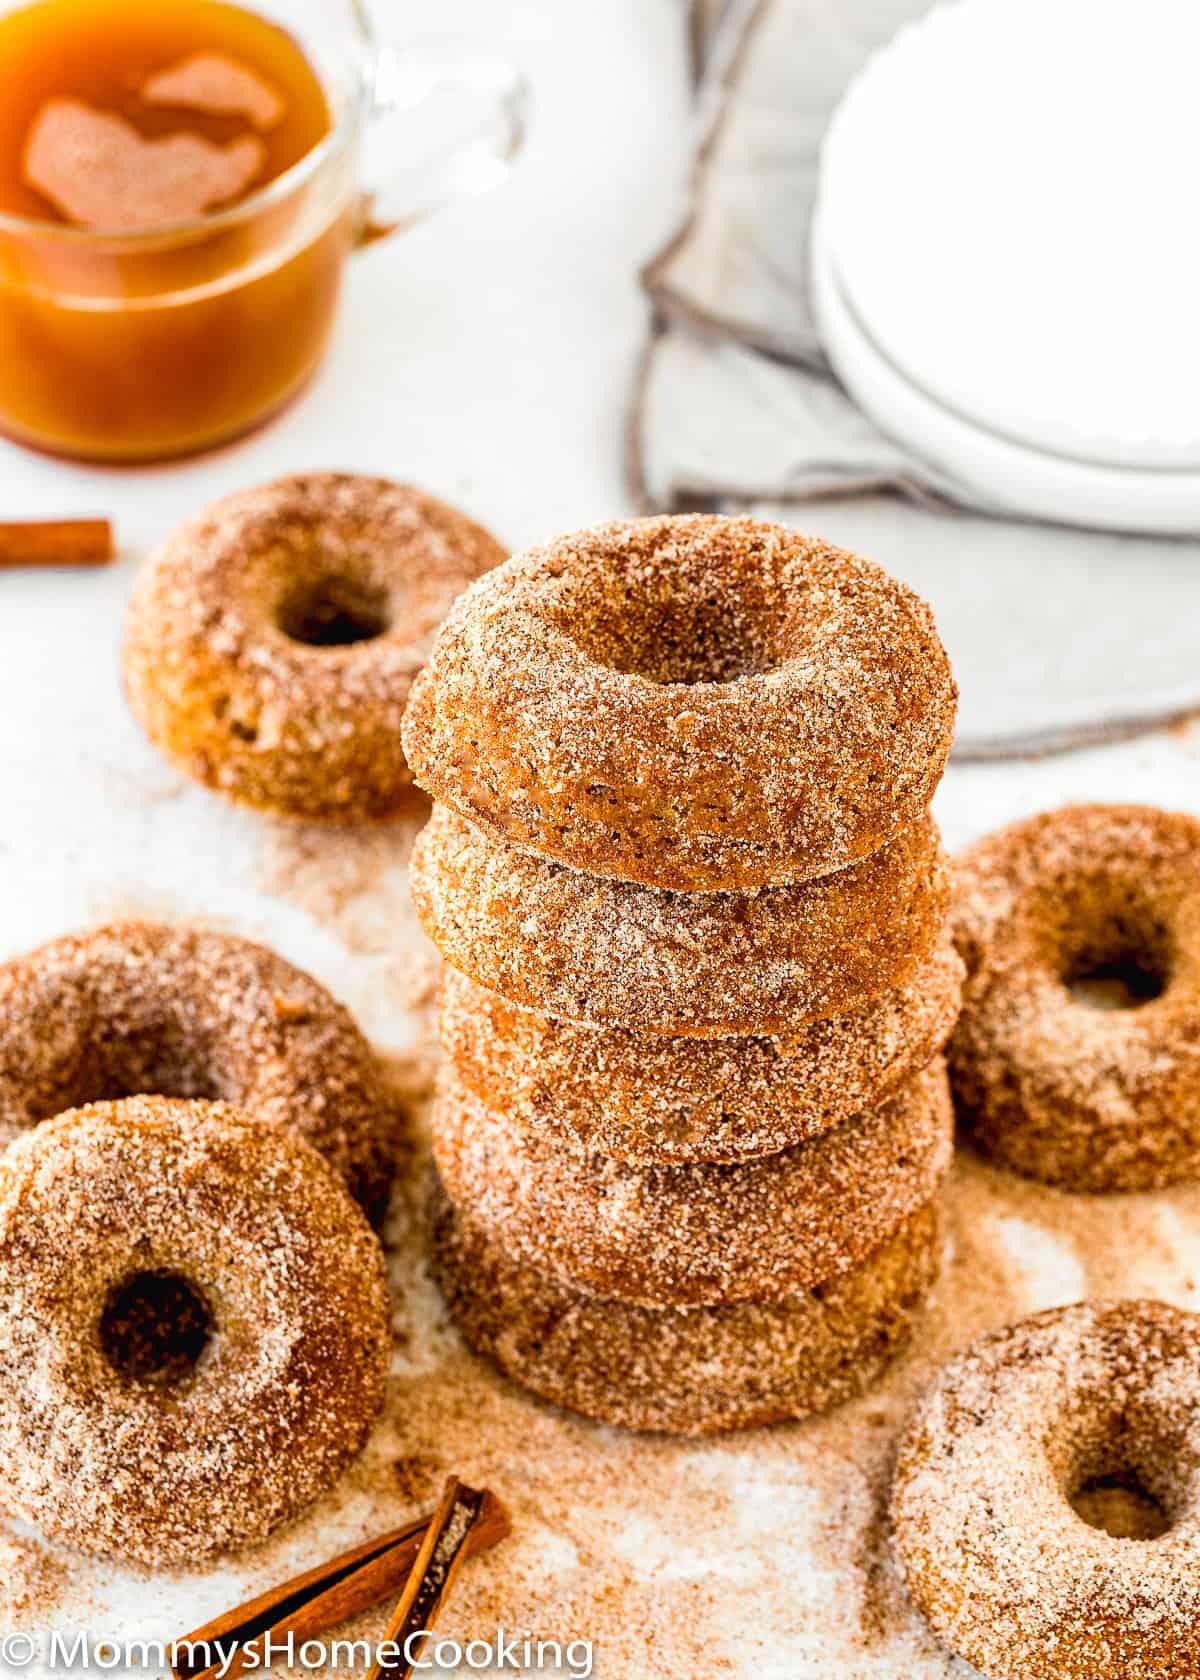 Eggless Apple Cider Donuts with sugar and cinnamon over a white surface and glass of apple cider in the background.